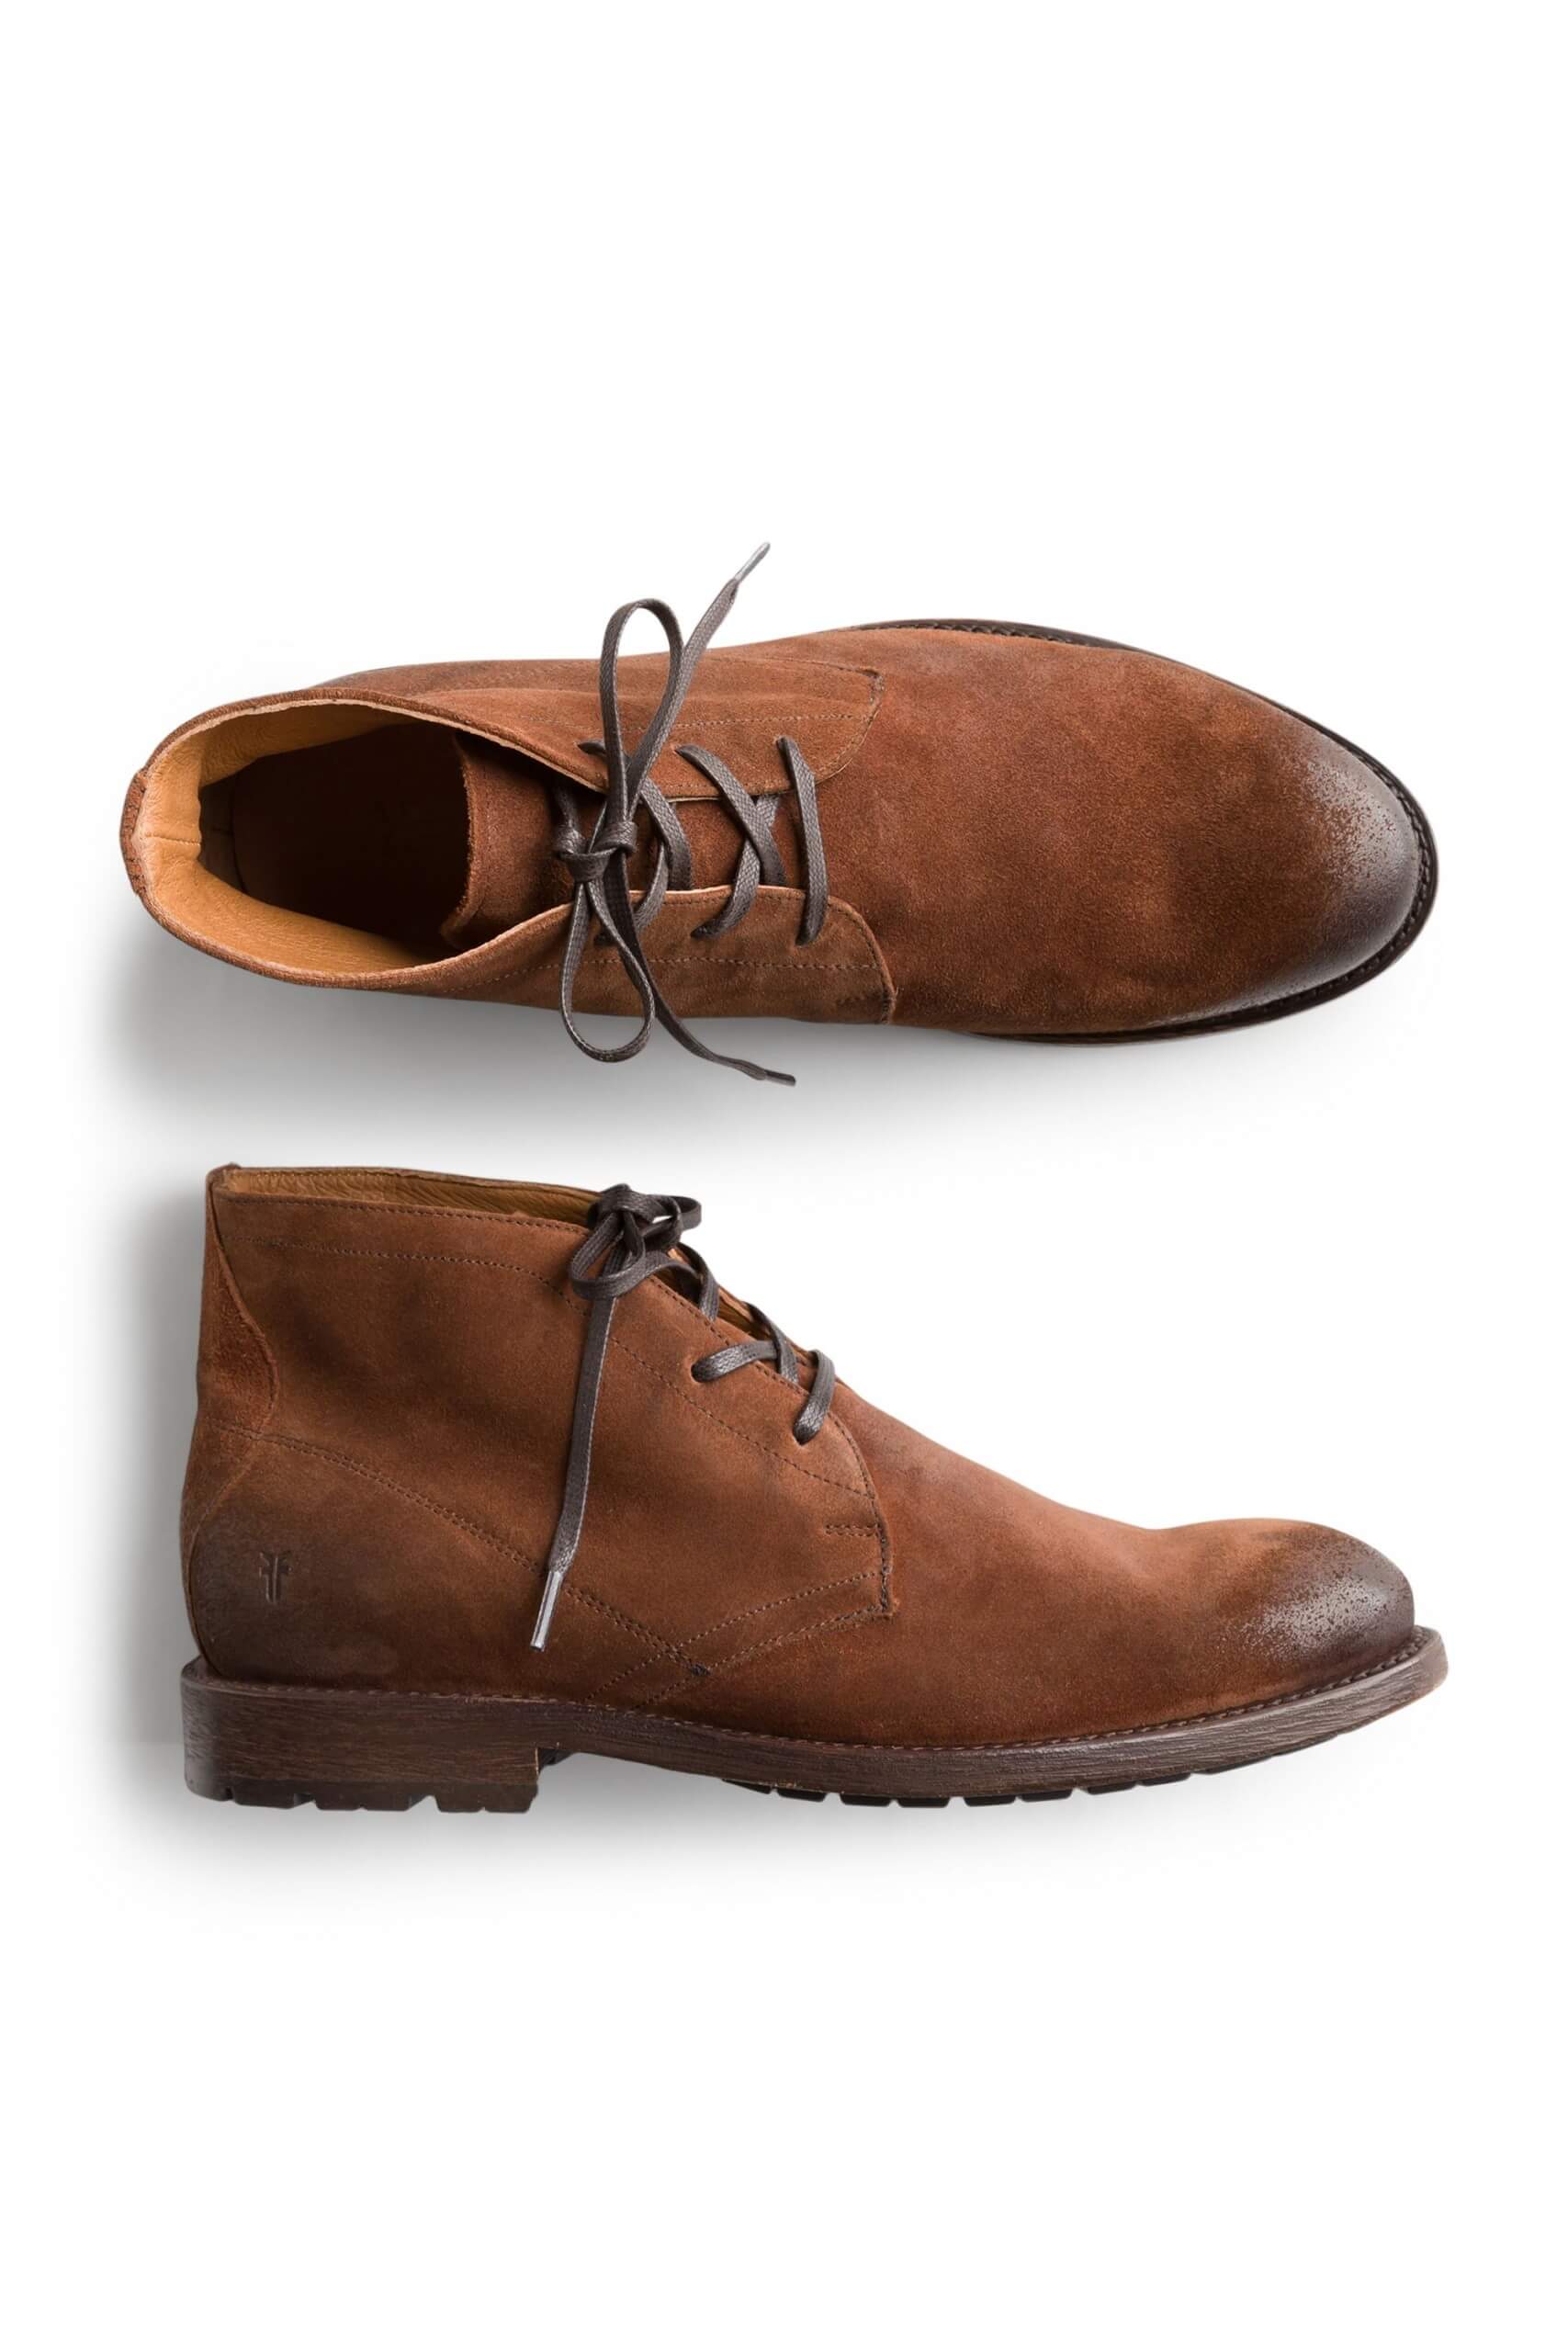 Shoes that go with jeans mens